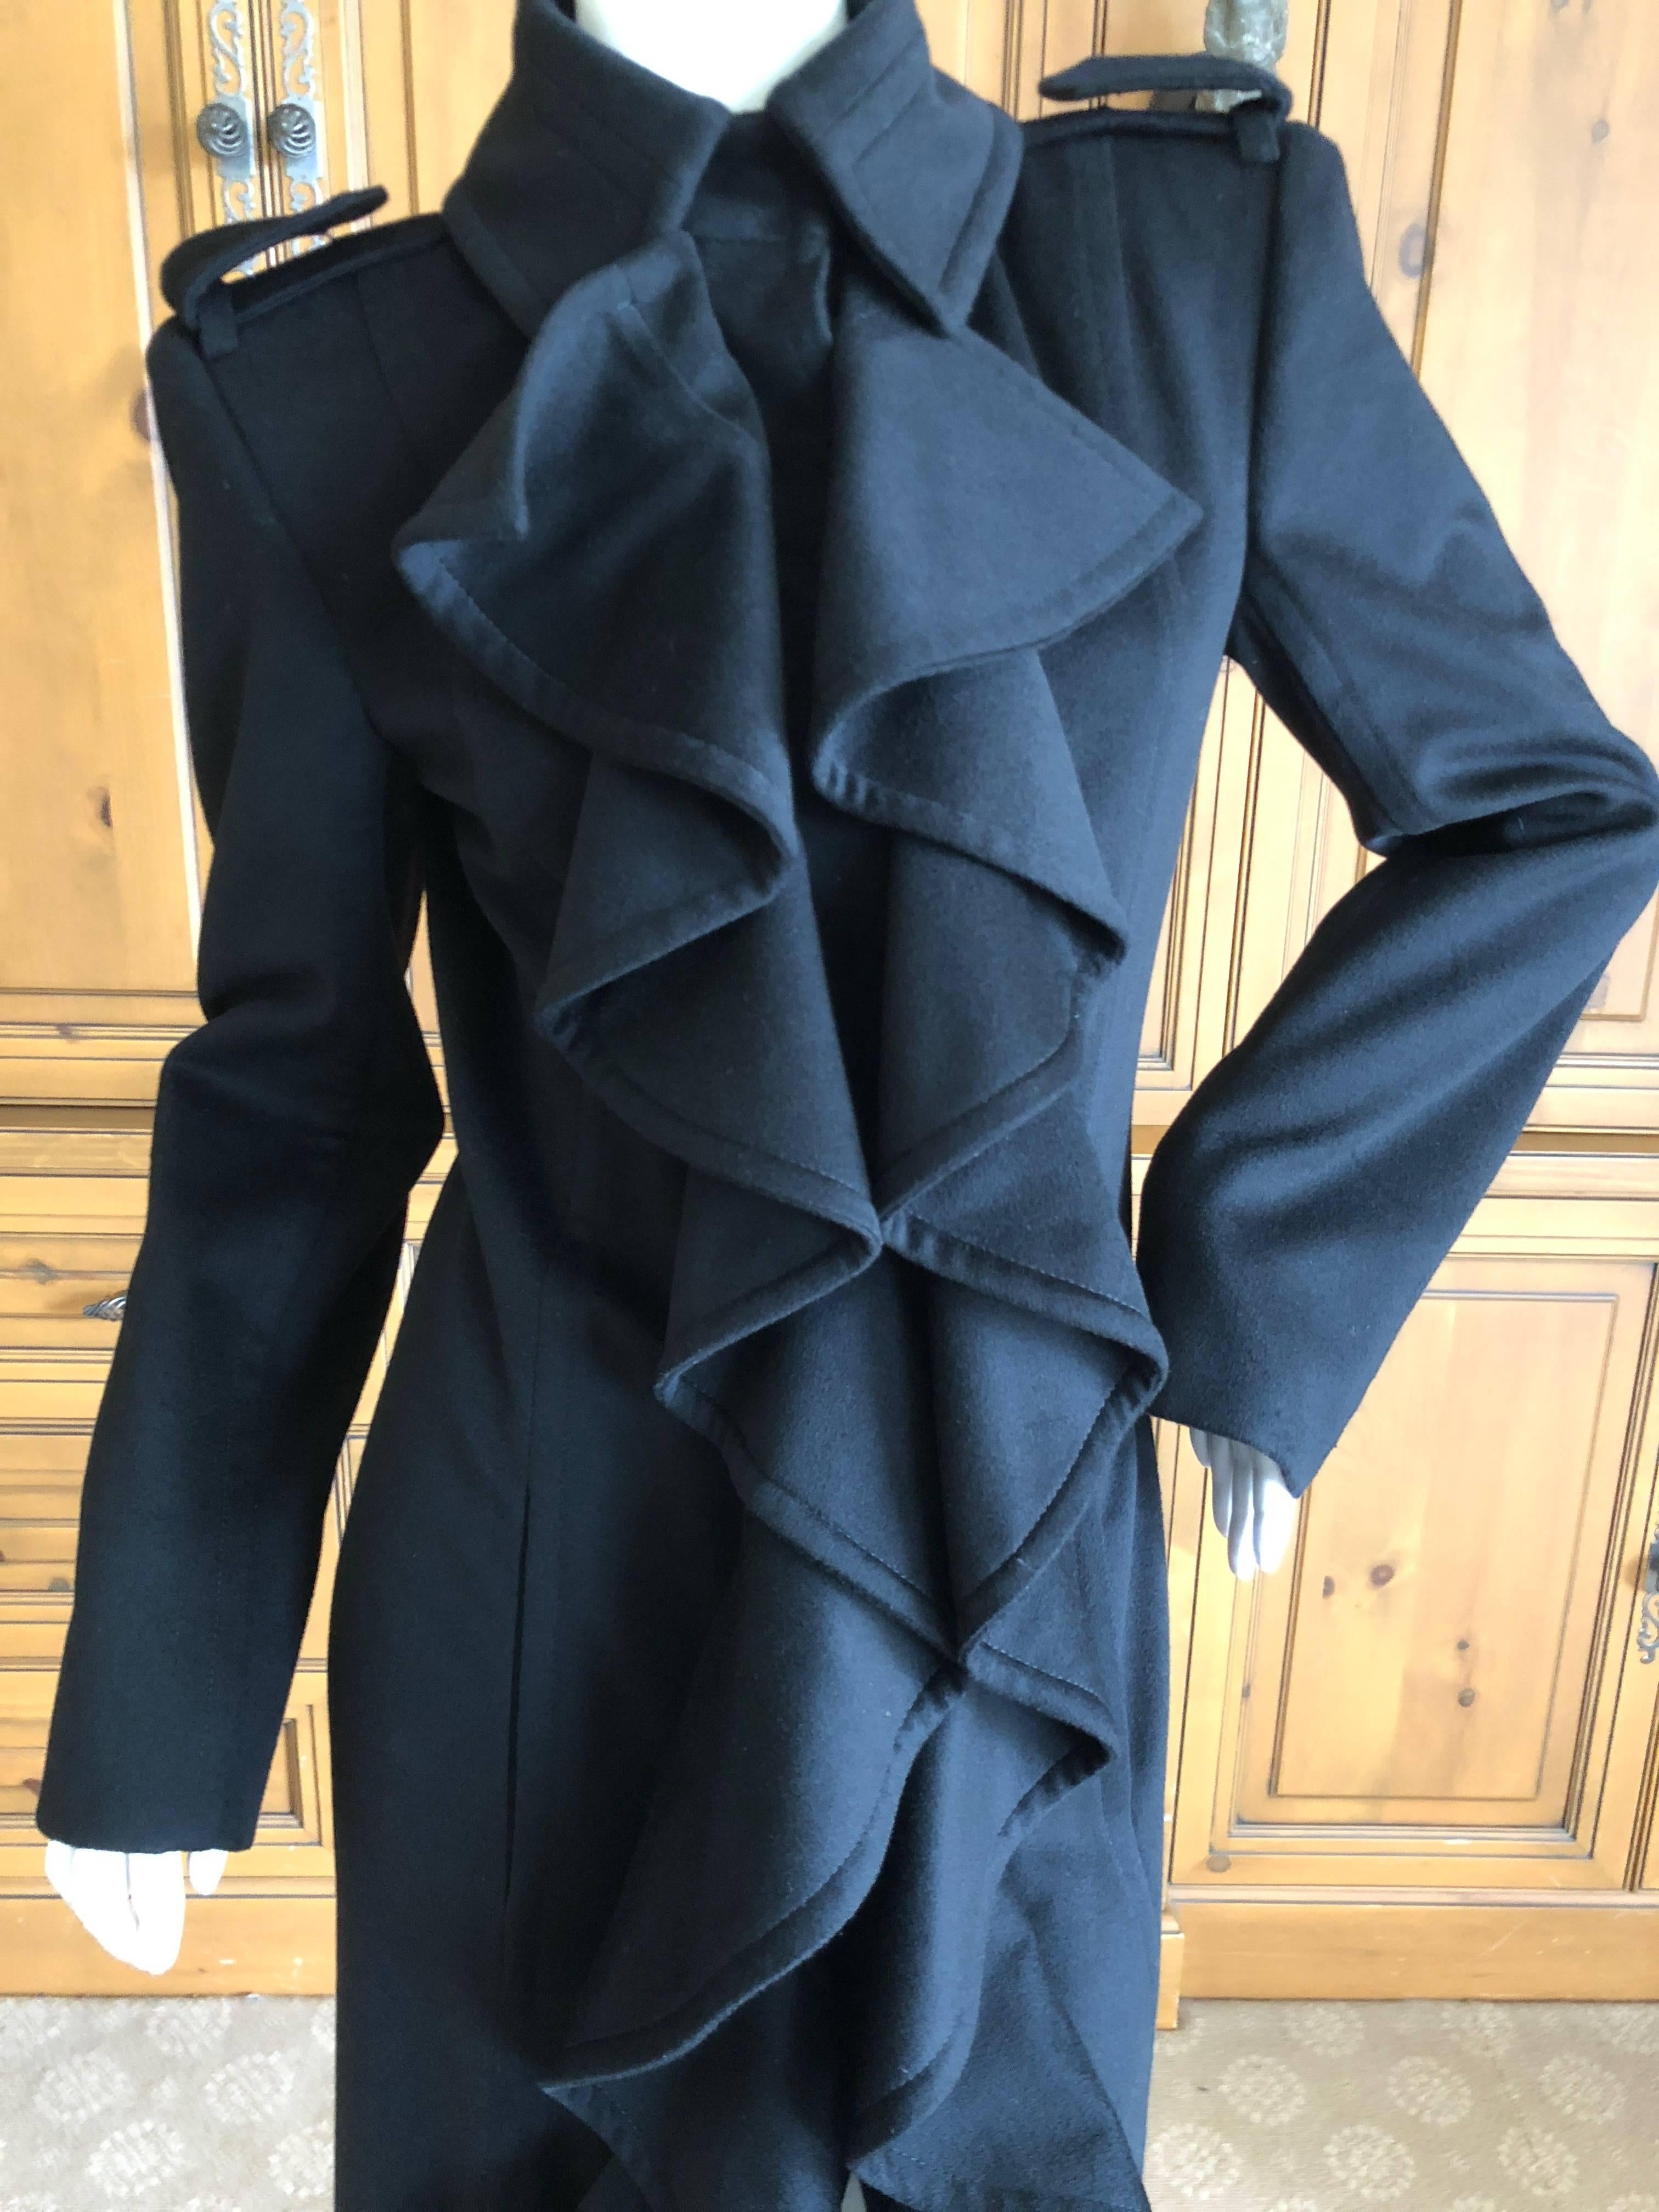 Yves Saint Laurent by Tom Ford Black Wool Ruffle Front Coat from Fall 2004 In Excellent Condition For Sale In Cloverdale, CA